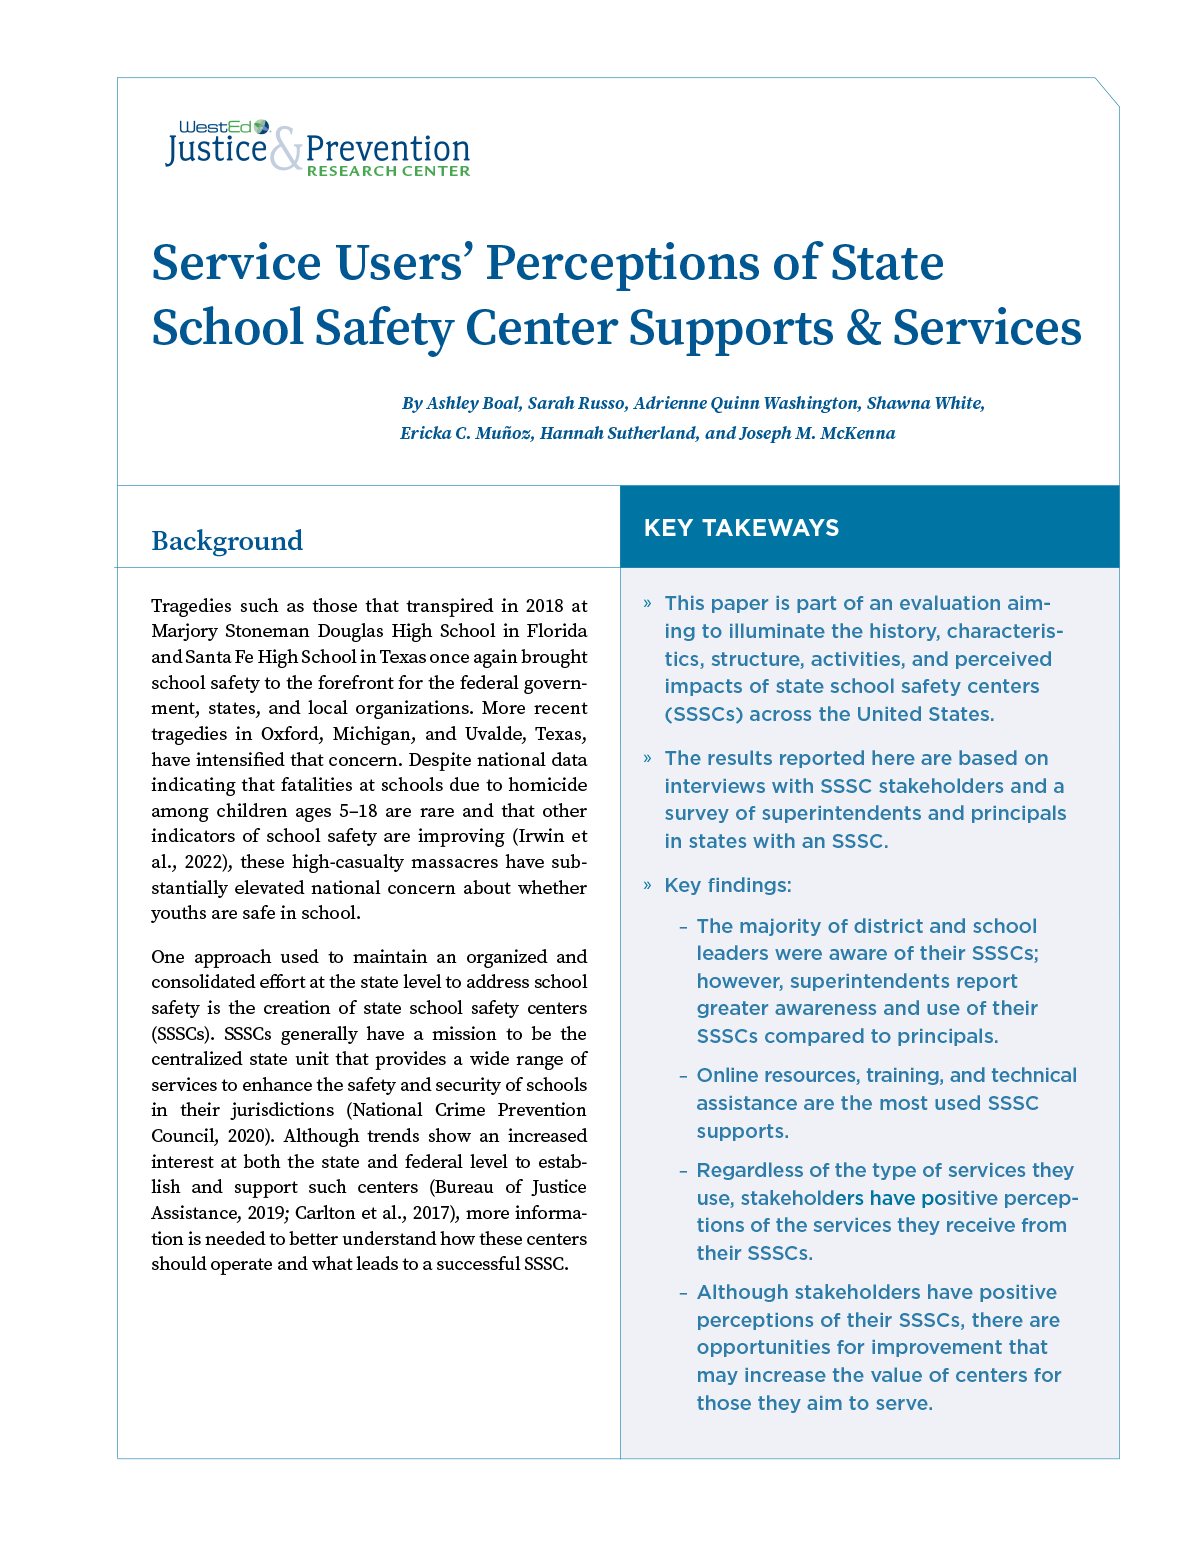 Service Users’ Perceptions of State School Safety Center Supports & Services